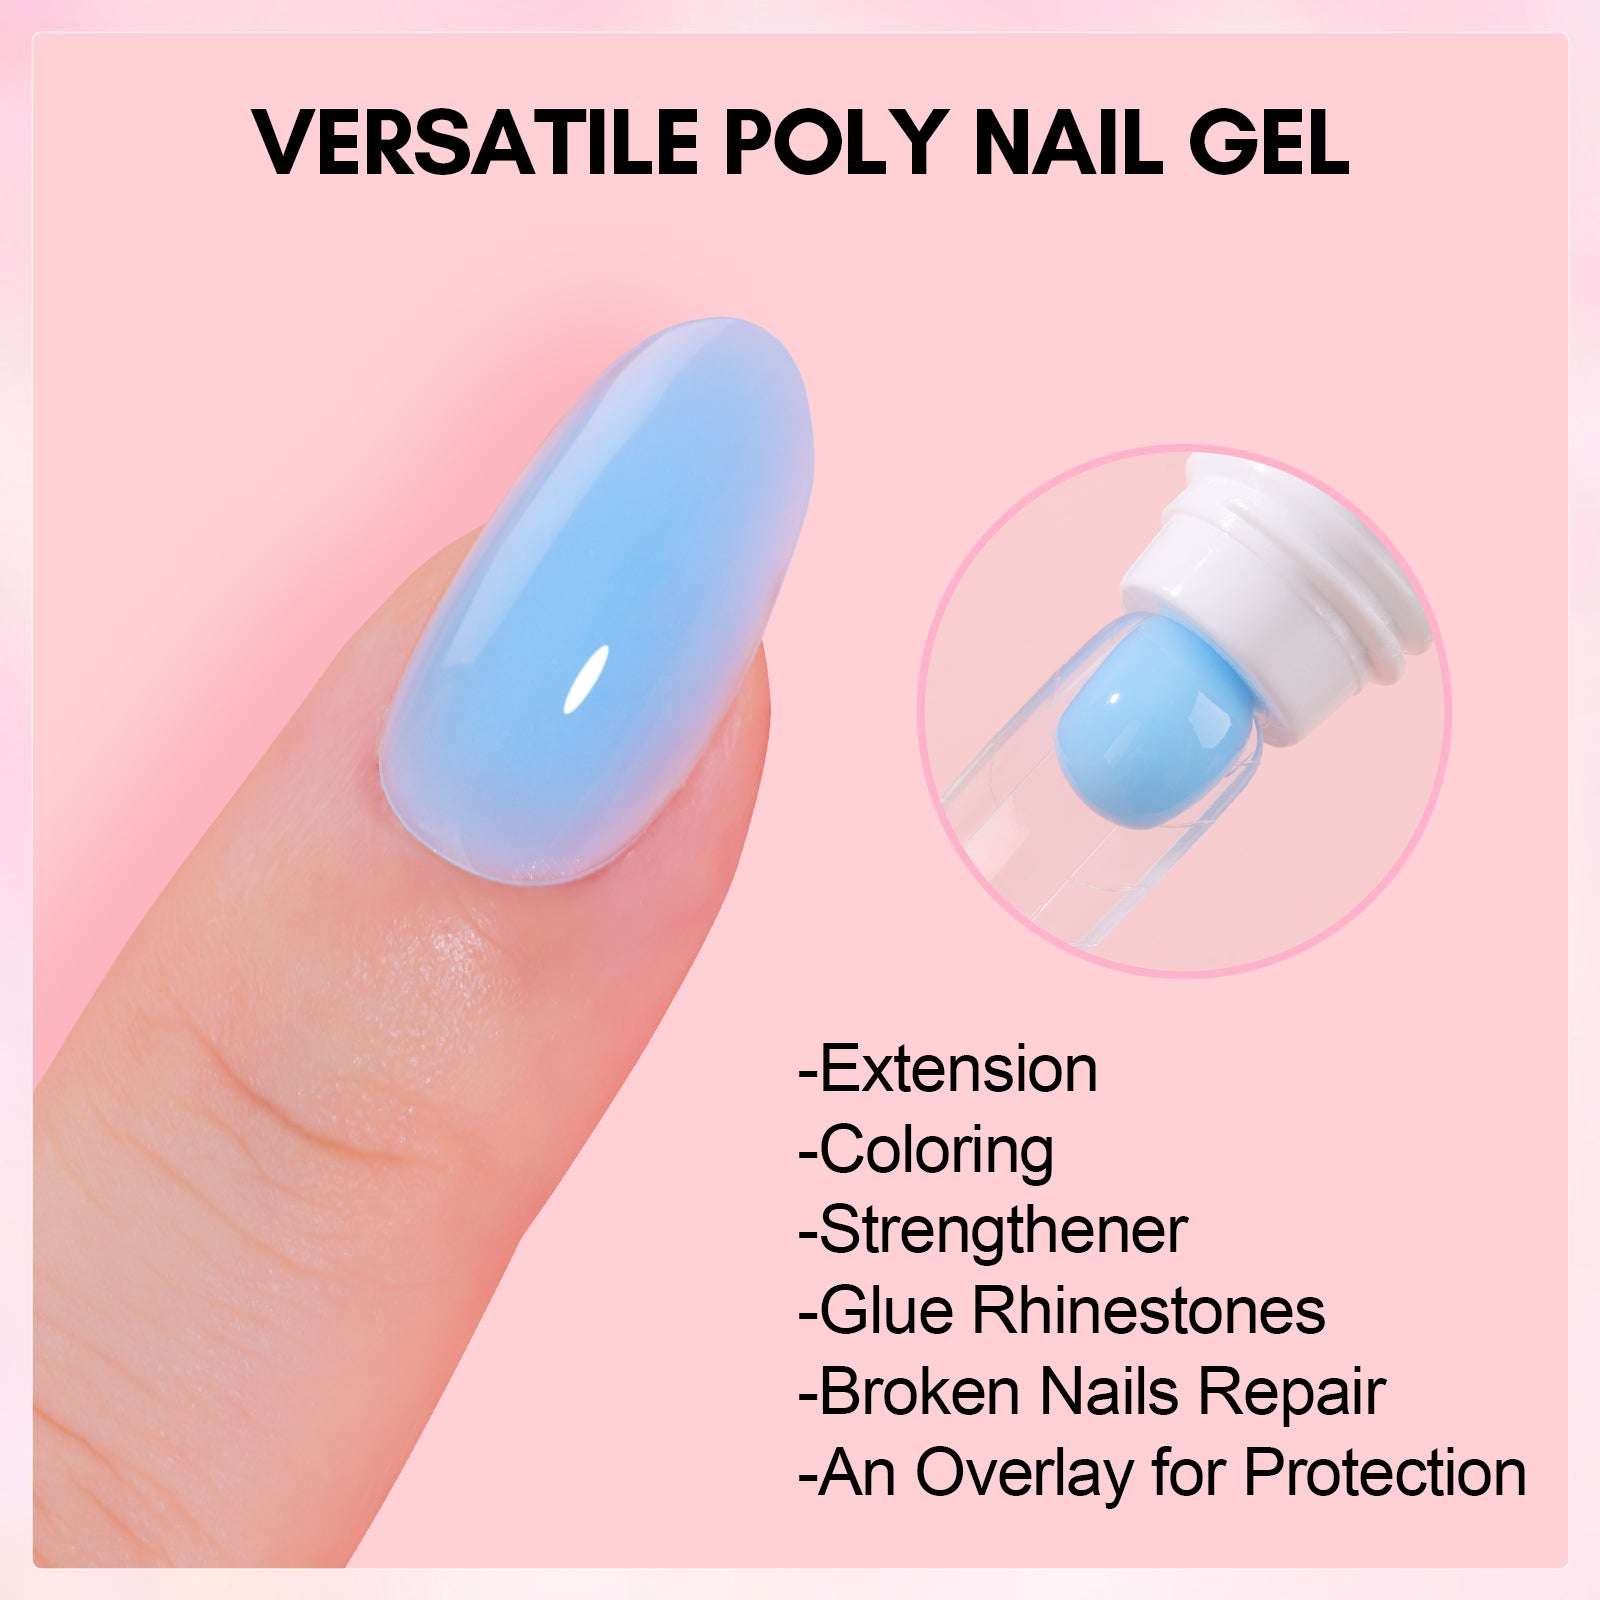 poly gel for nails